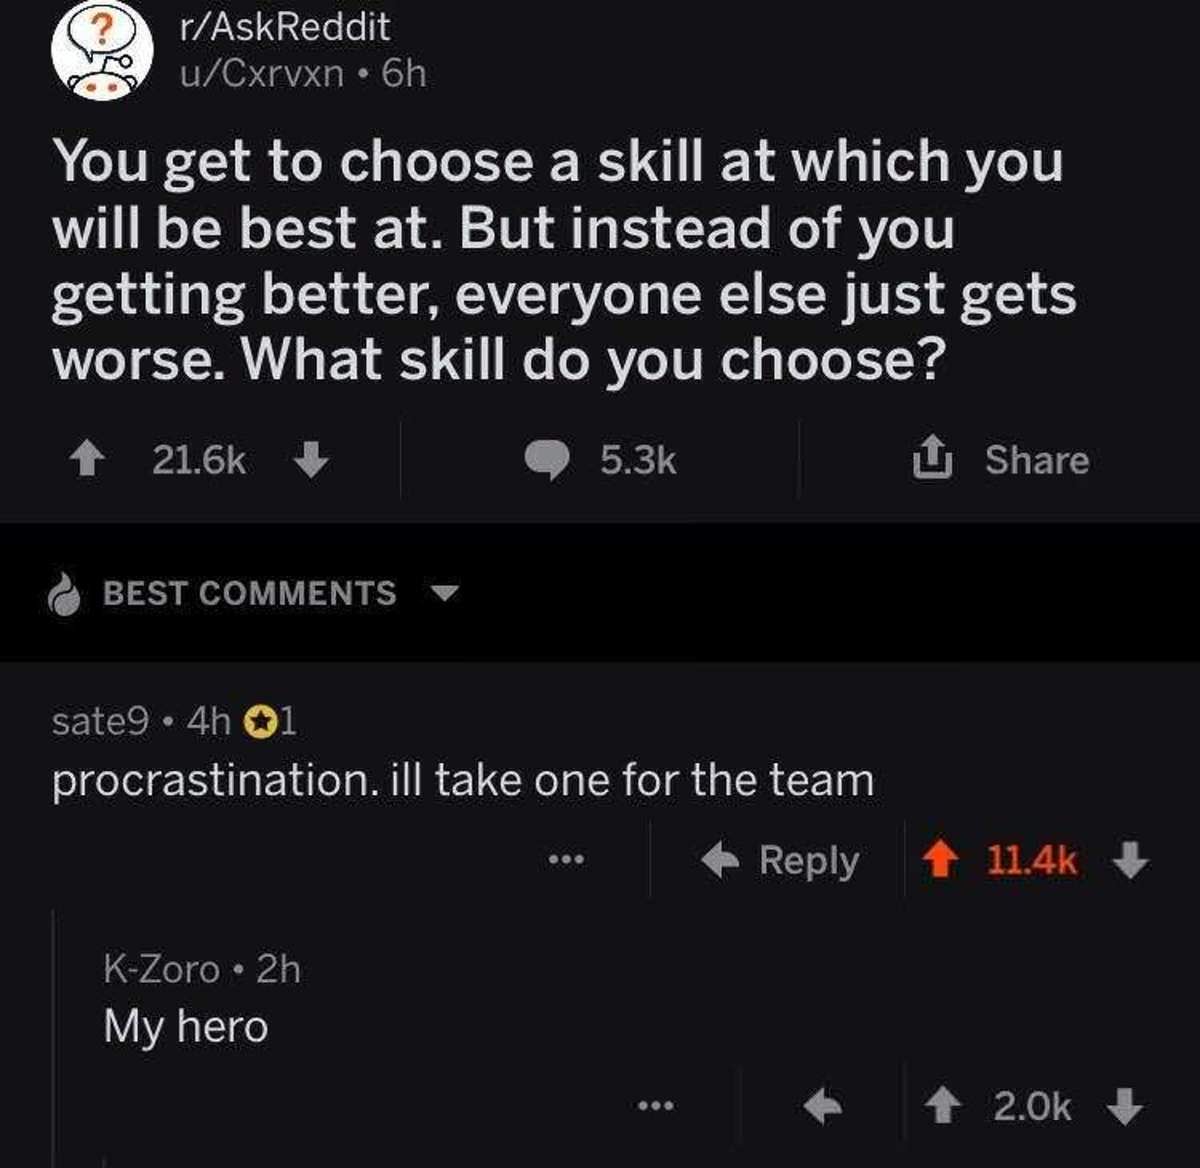 screenshot - rAskReddit S uCxrvxn. 6h You get to choose a skill at which you will be best at. But instead of you getting better, everyone else just gets worse. What skill do you choose? 1 Best sate9 4h 01 procrastination. ill take one for the team ... KZo